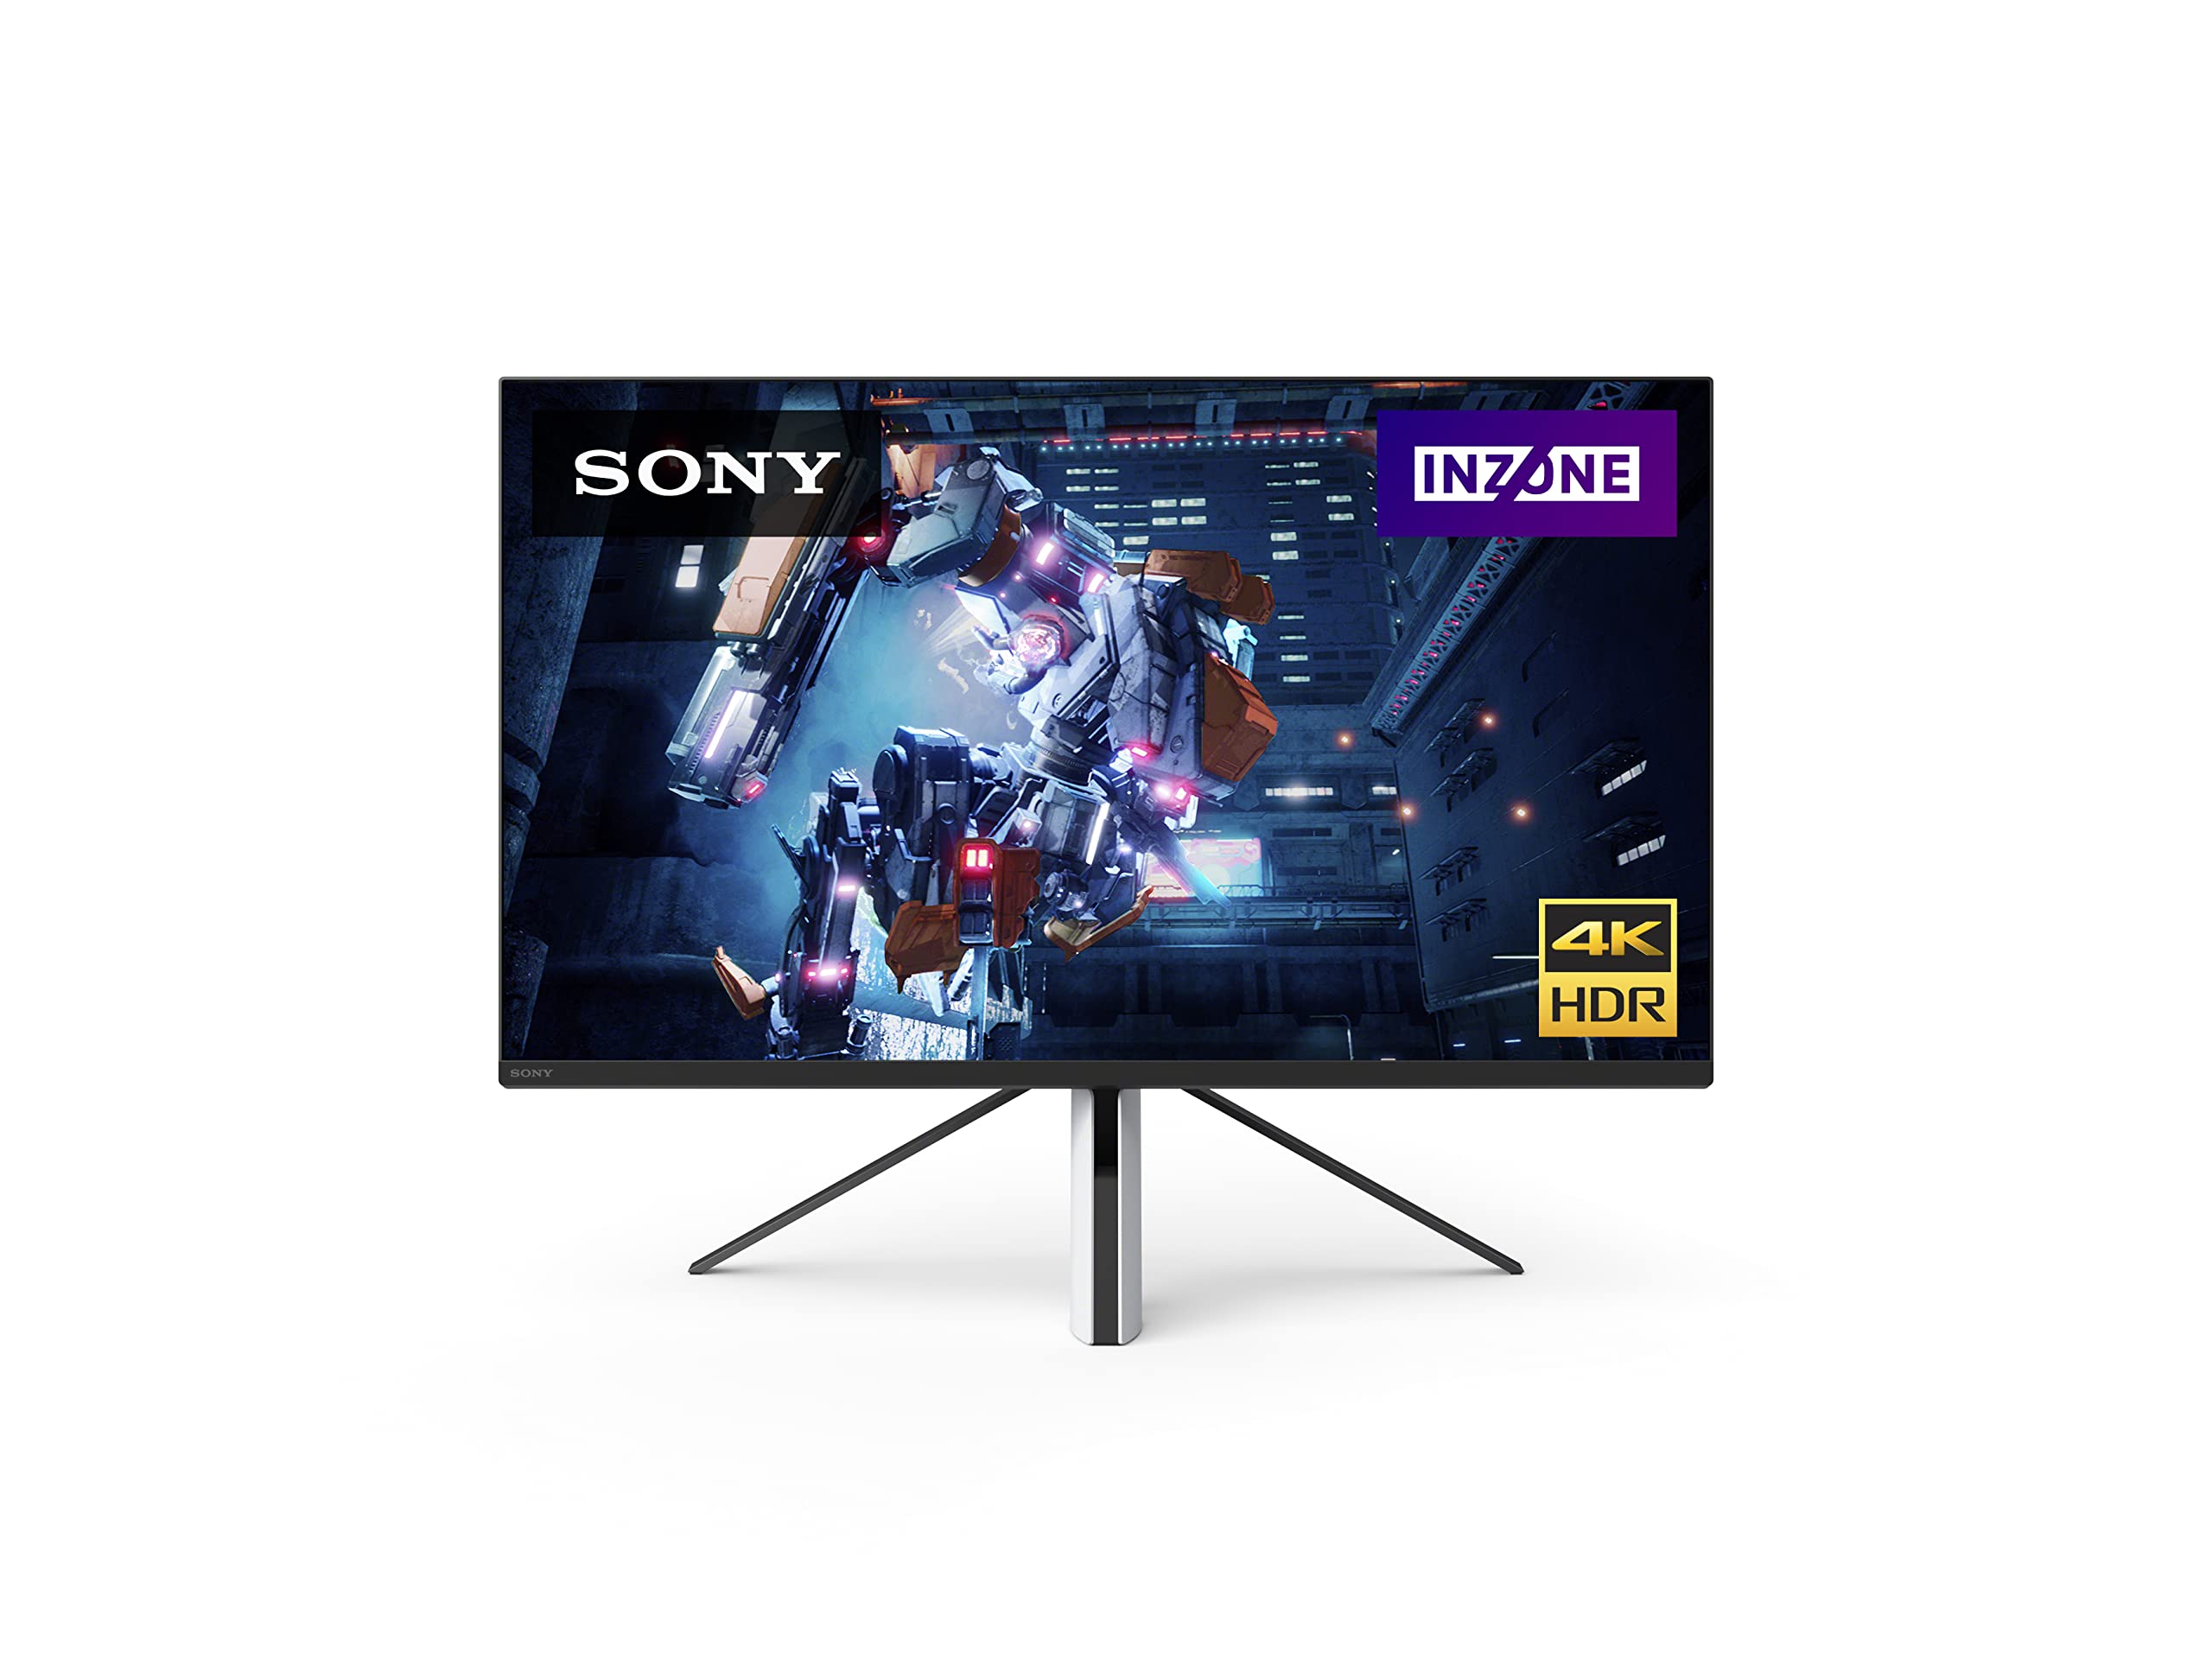 Sony 27 INZONE M9 4K HDR 144Hz Gaming-Monitor mit Full Array Local Dimming und NVIDIA G-SYNC (2022)